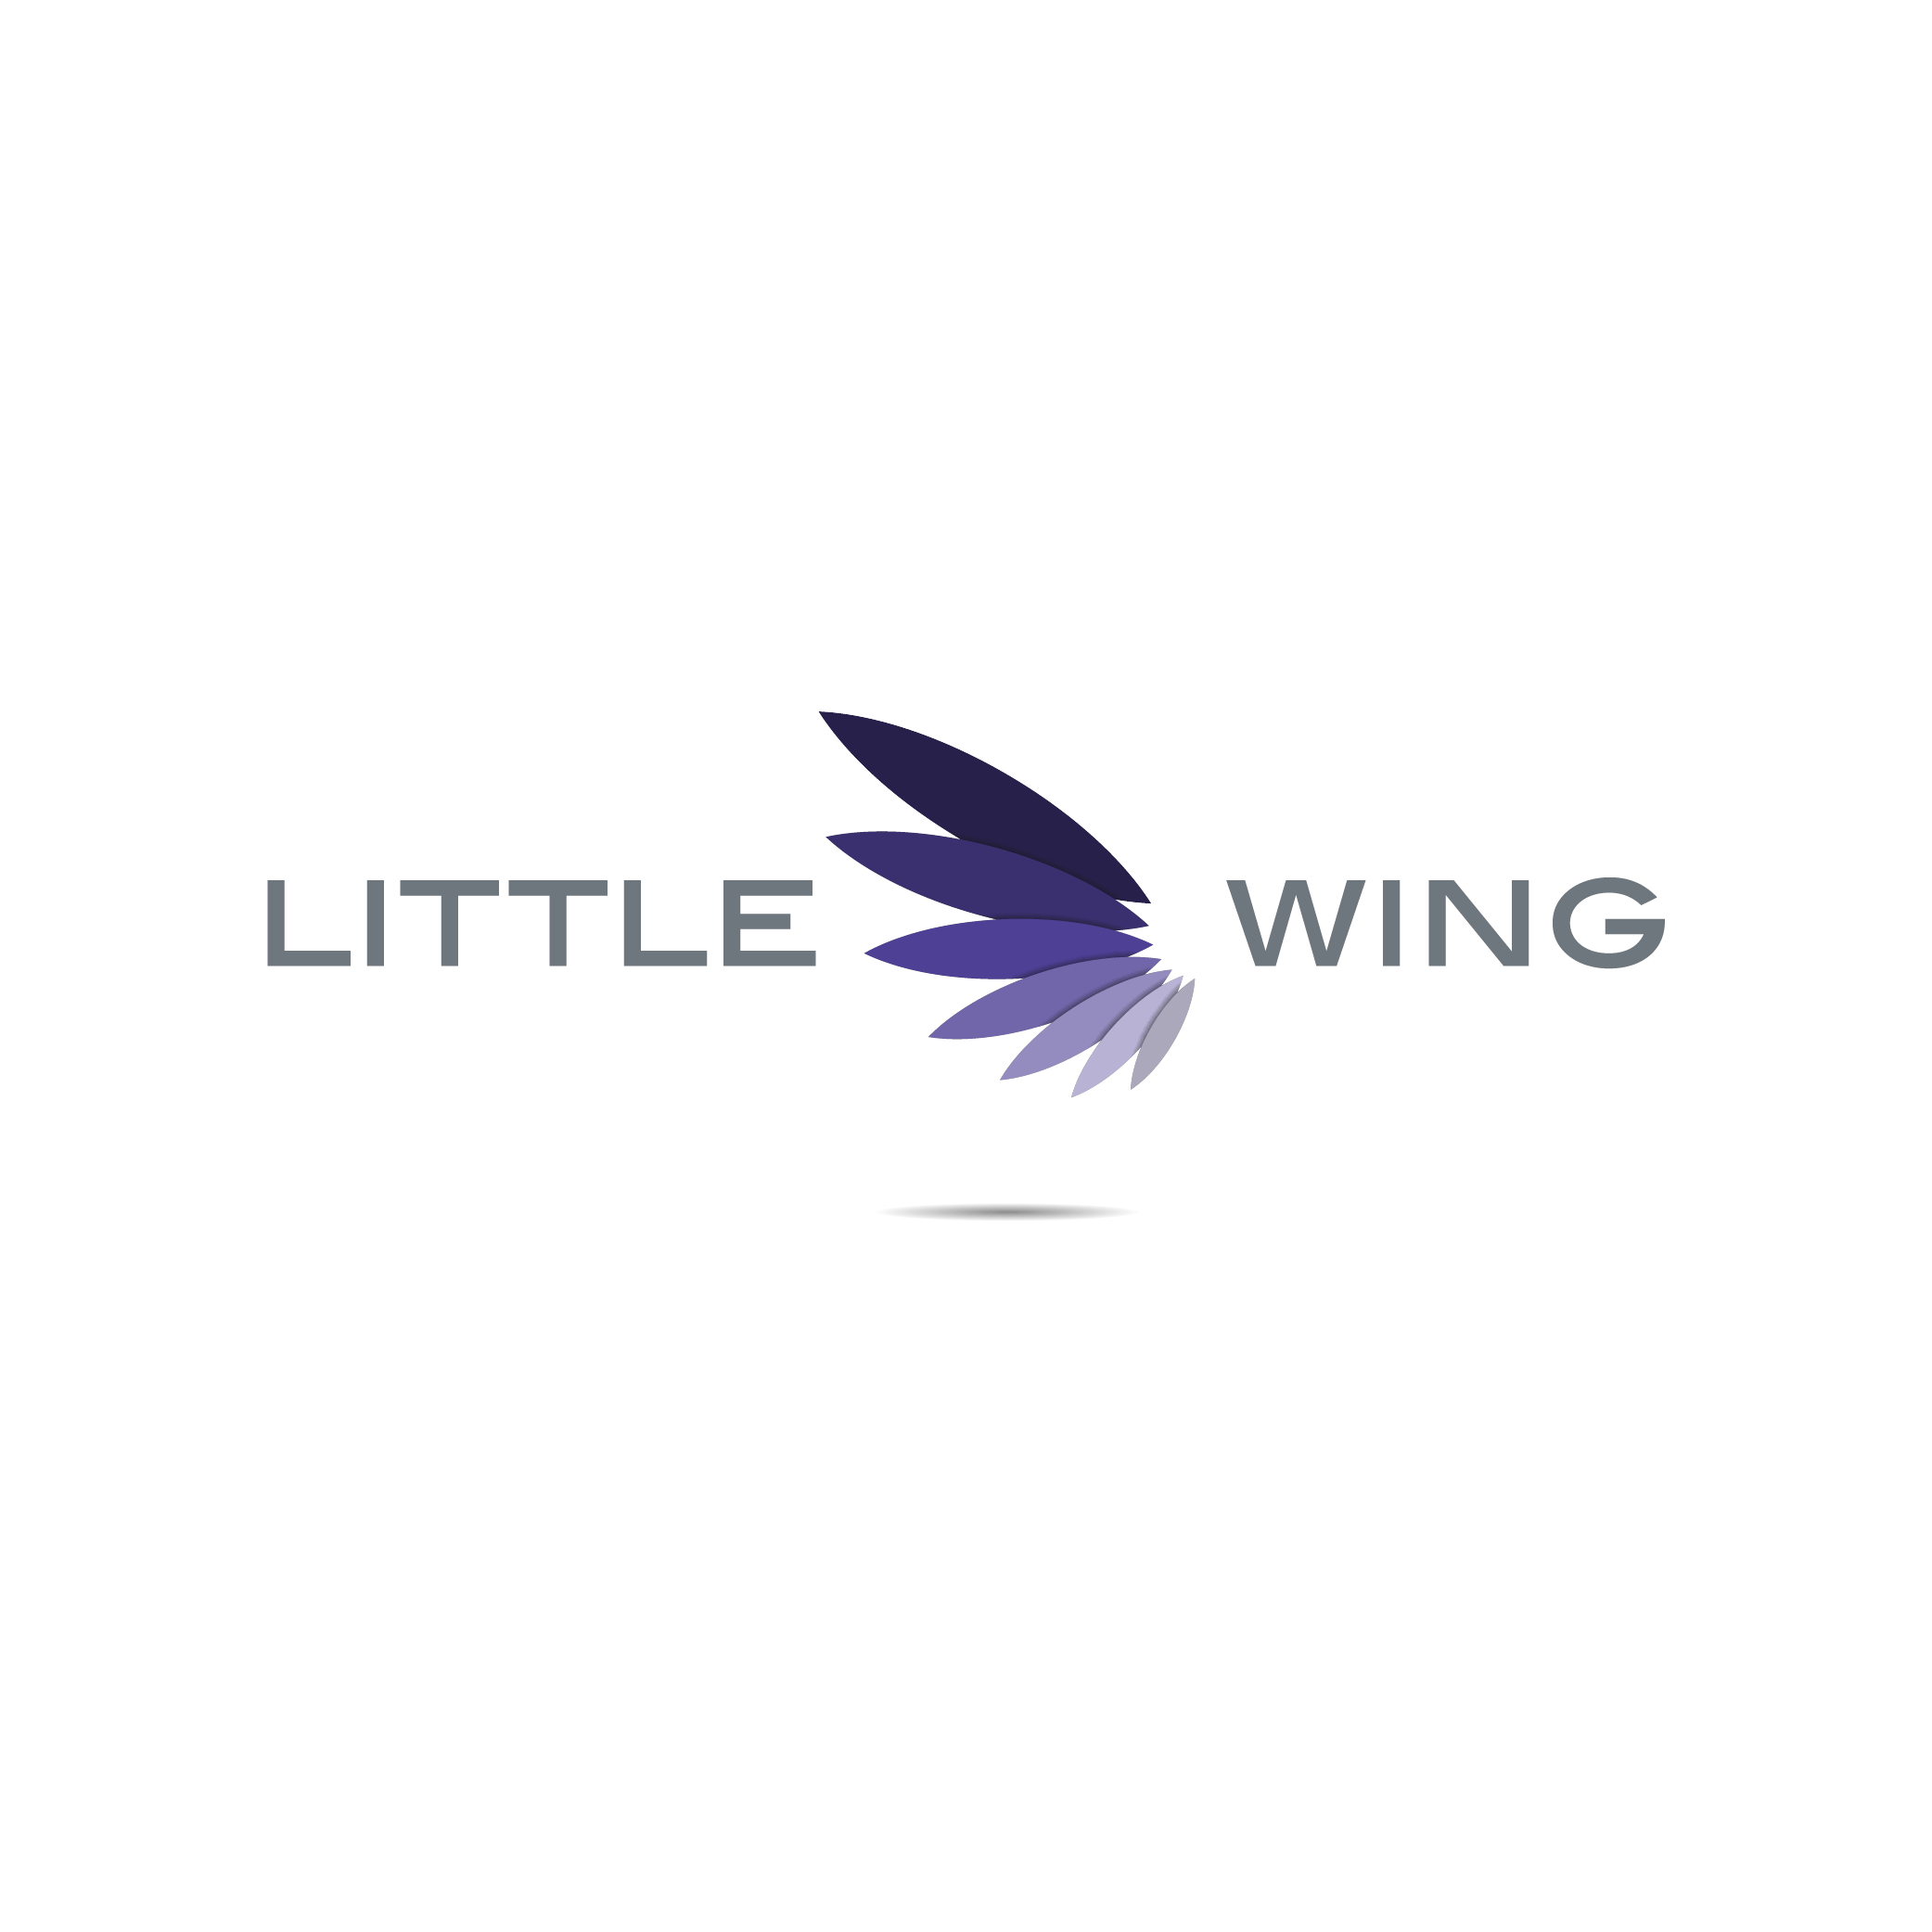 Wing Graphics for Logo - DesignContest - Little Wing little-wing